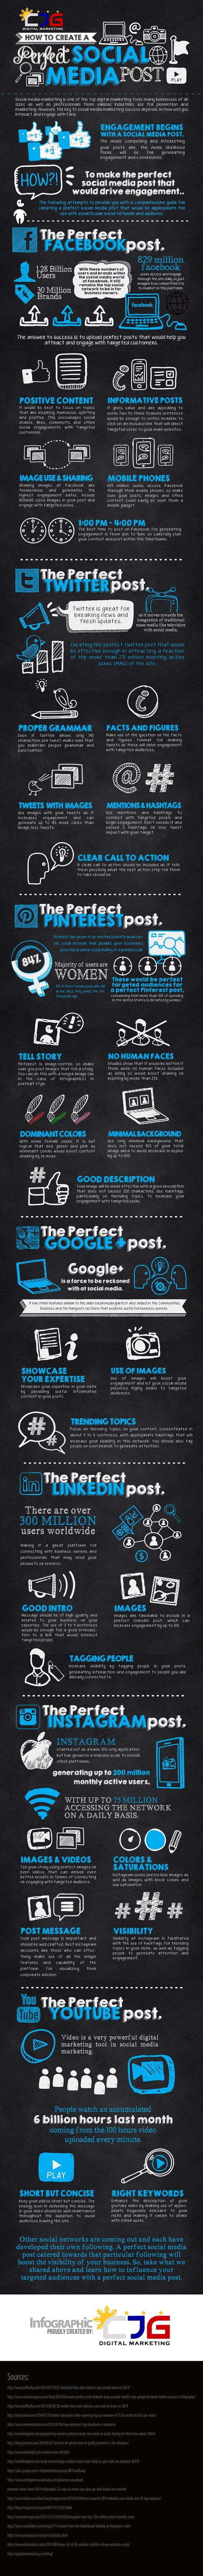 How to Craft the Perfect Social Media Post